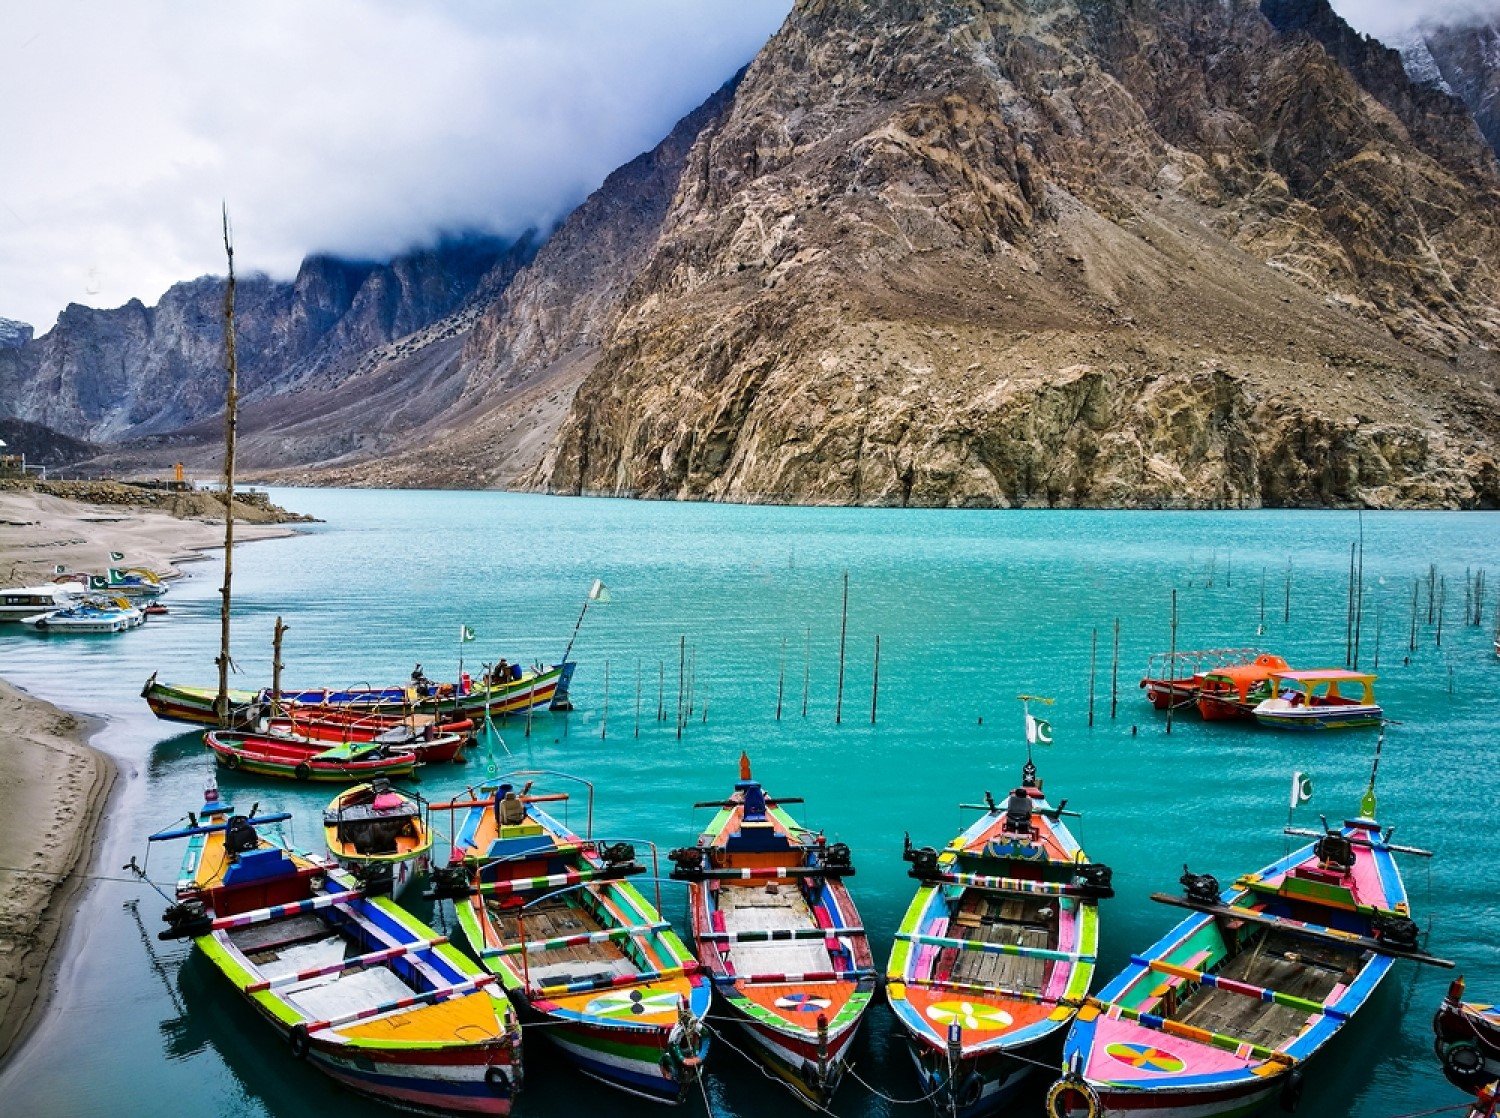 stock-photo-colorful-local-boat-at-attabad-lake-in-upper-hunza-pakistan-1636306735-transformed.jpeg